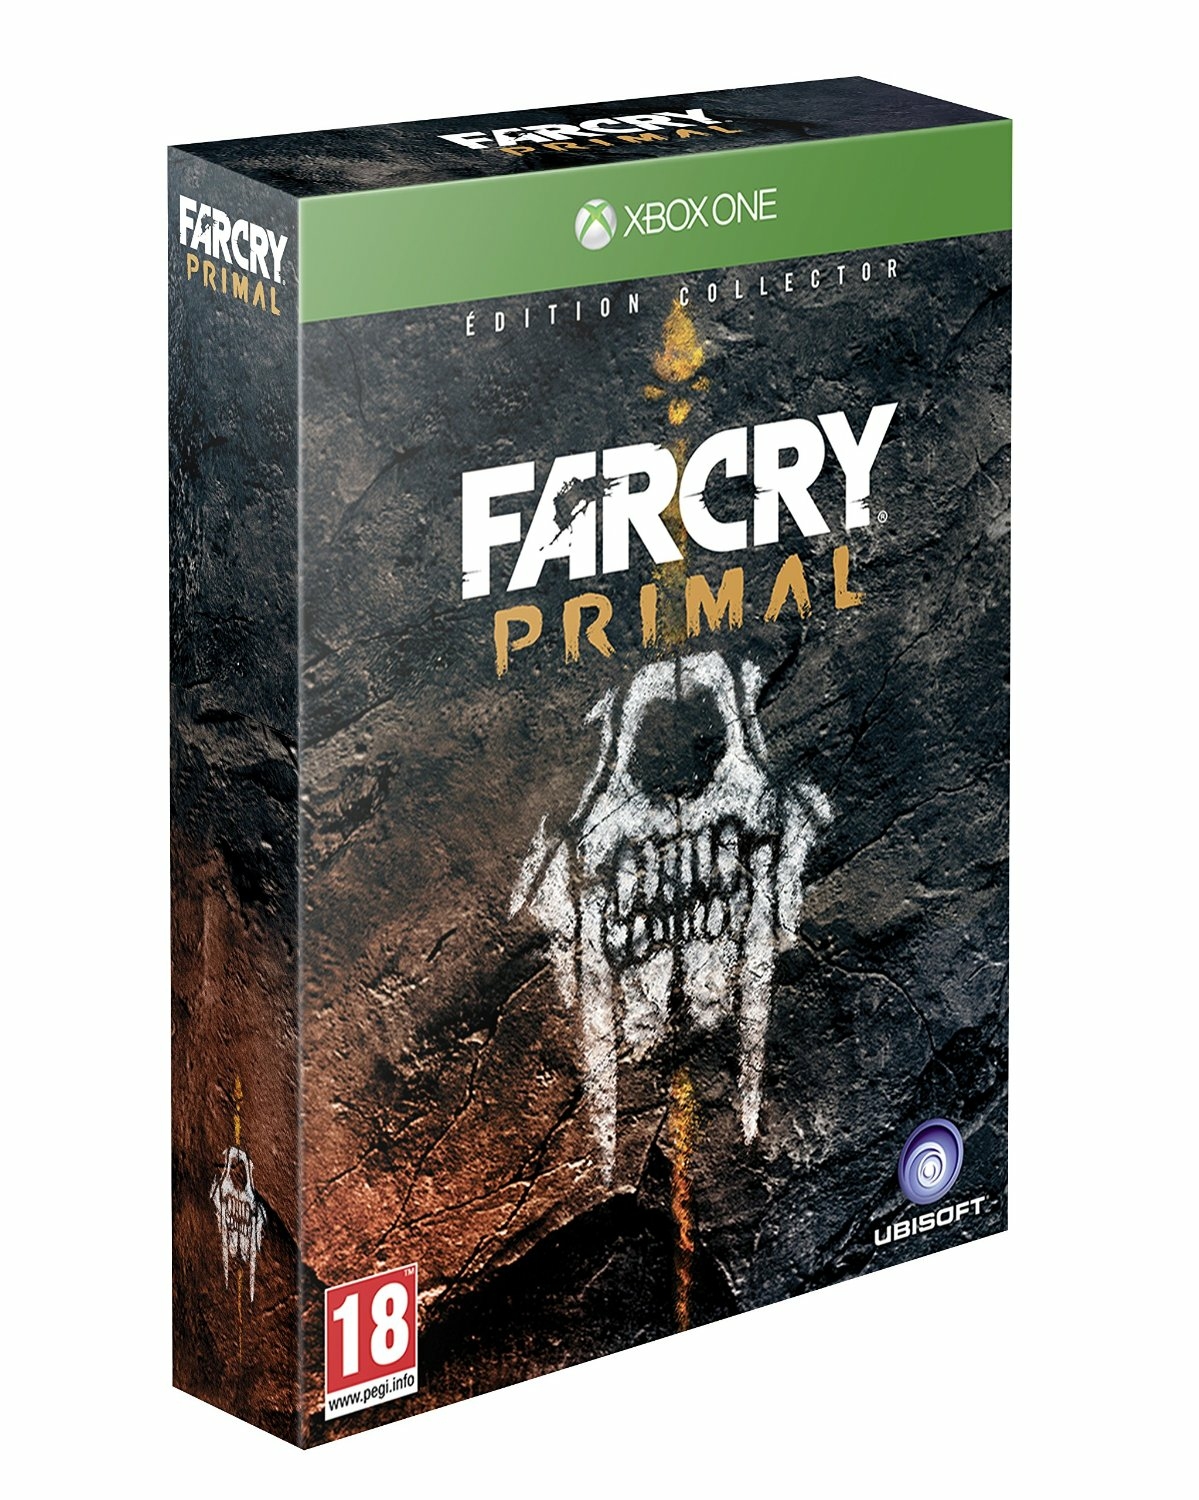 far cry primal xbox one download